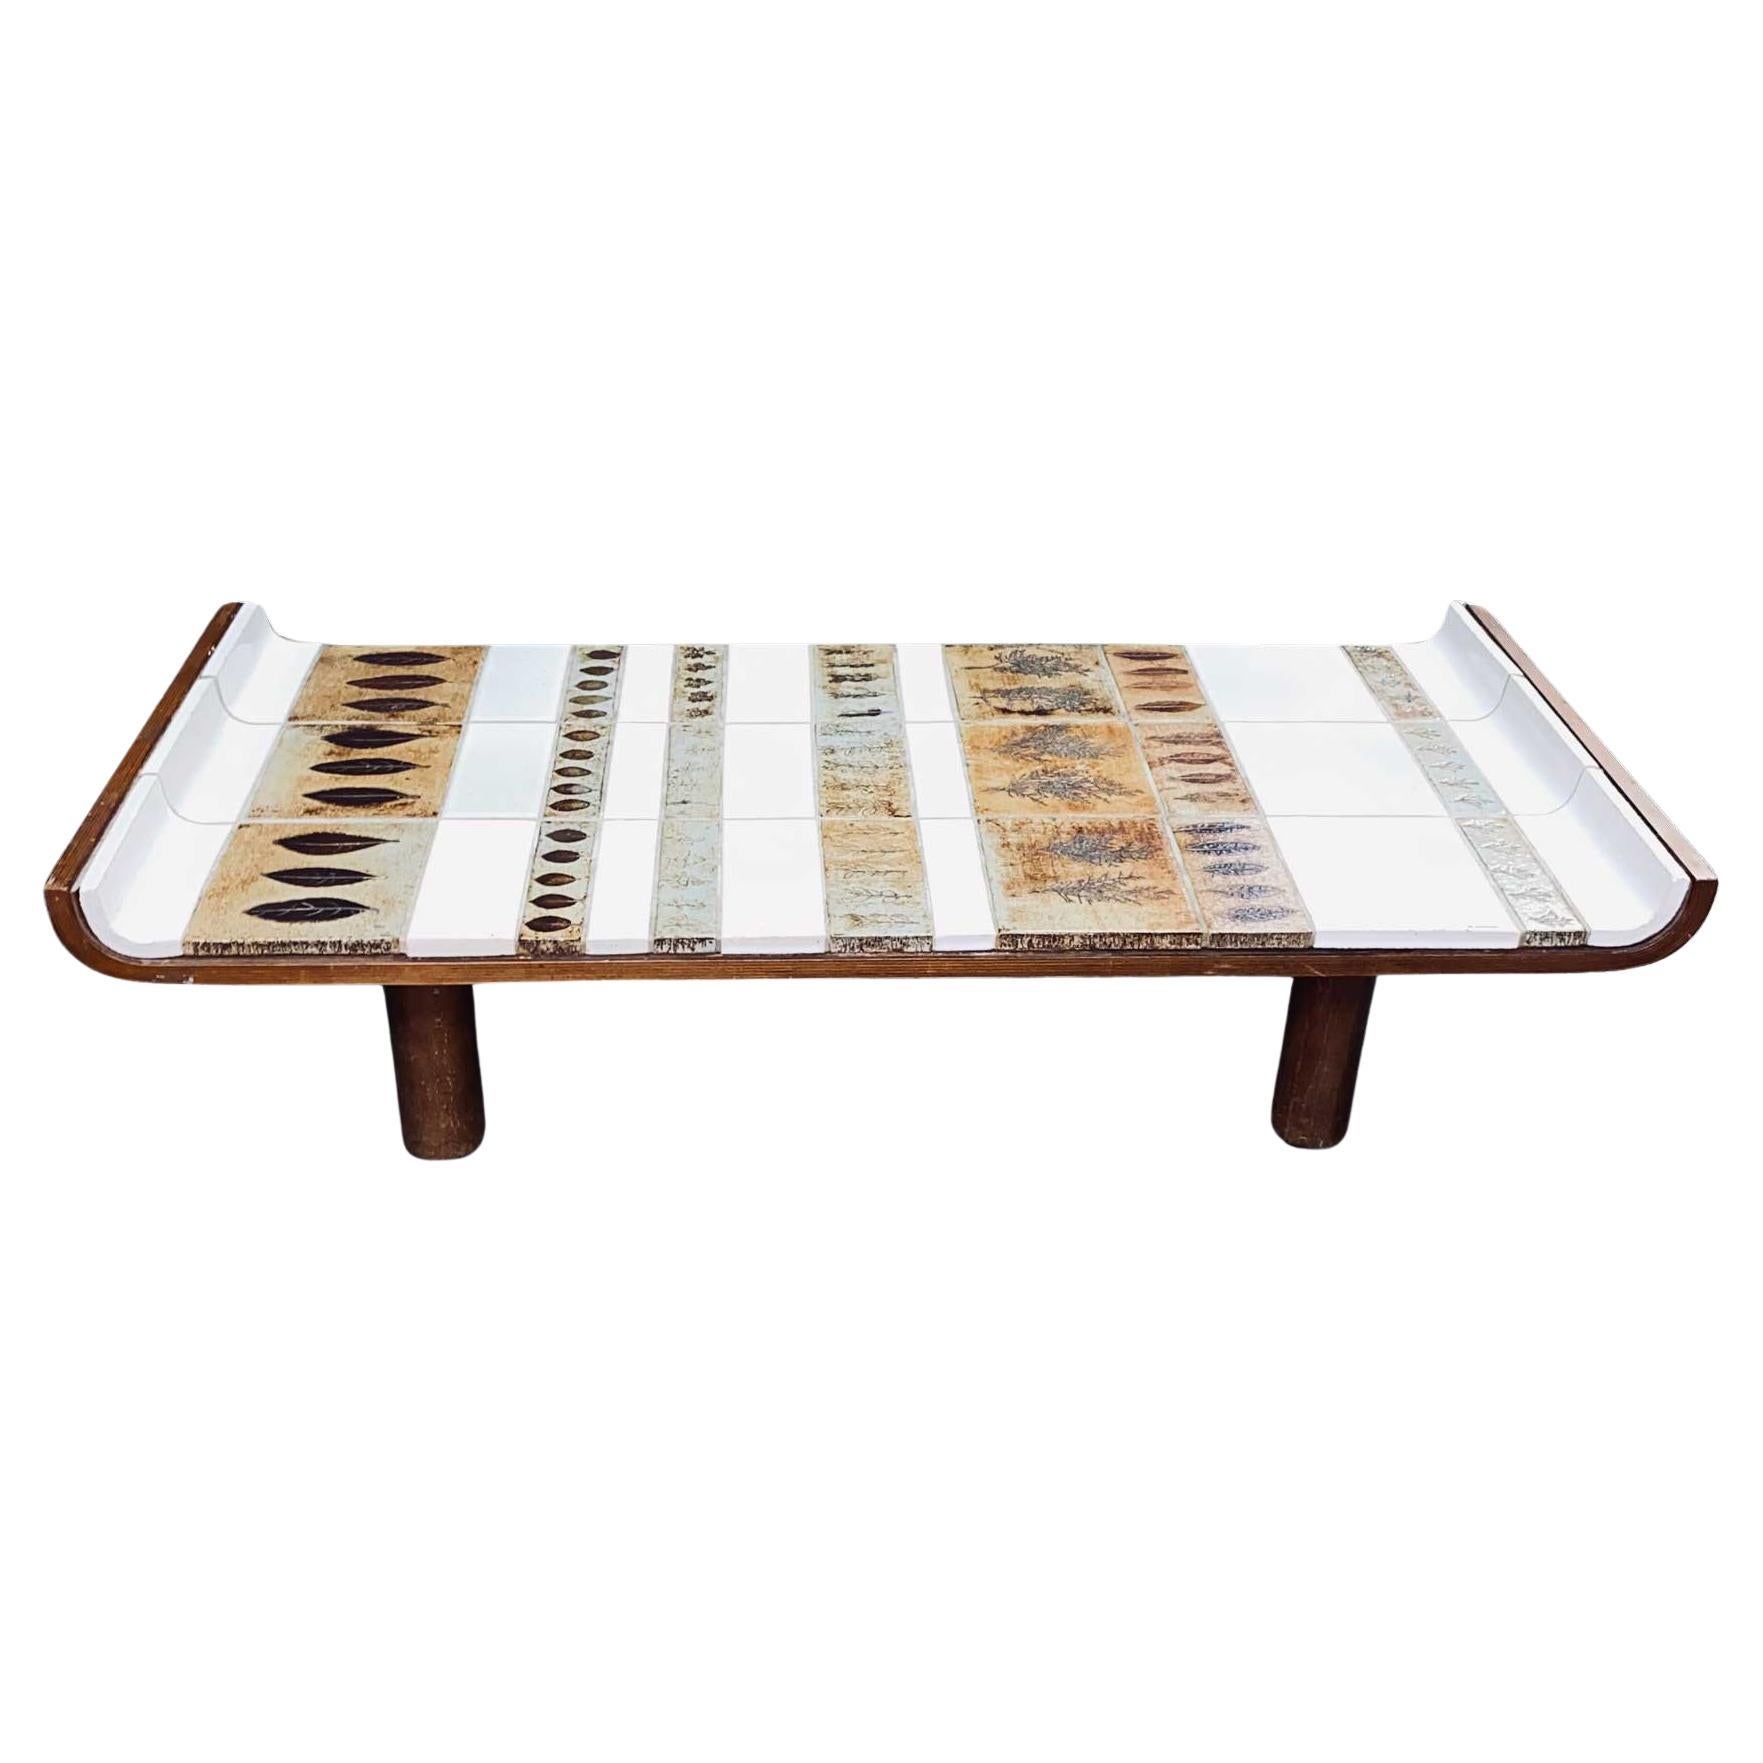 ROGER CAPRON Pagode table vallauris 1970 For Sale